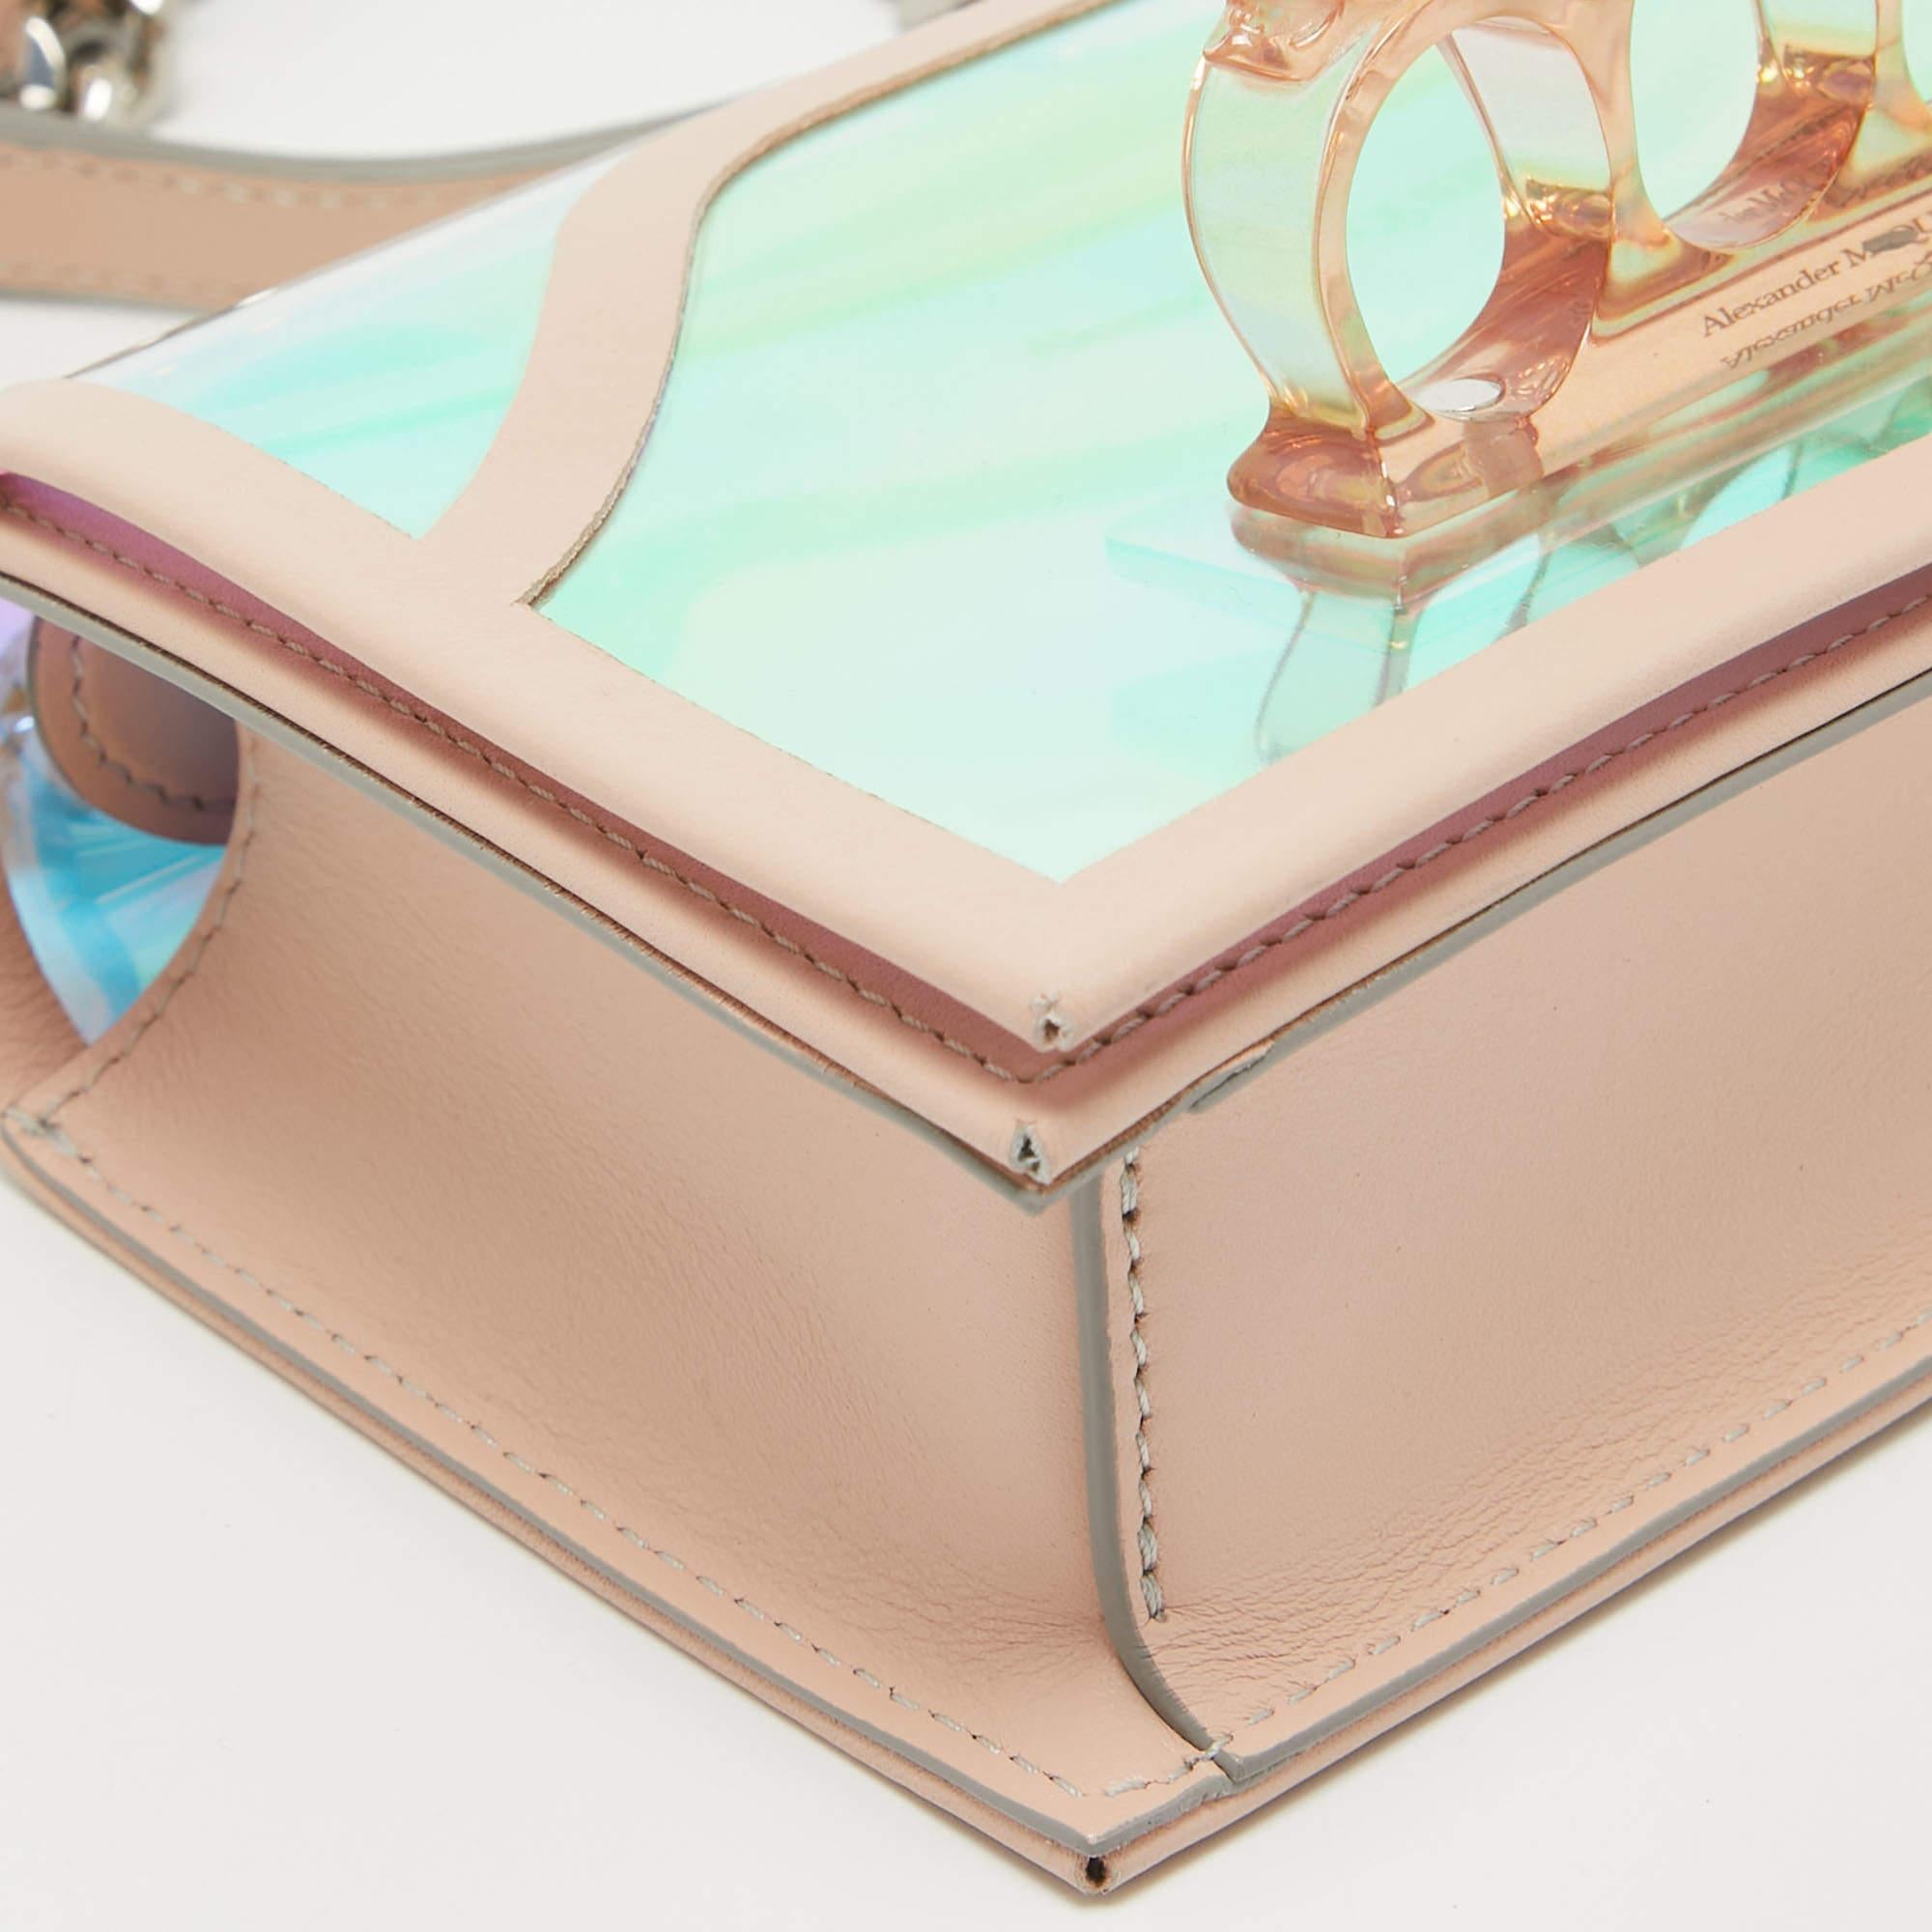 Alexander McQueen Holographic/Pink Pvc and Leather Knuckle Duster Shoulder Bag For Sale 4